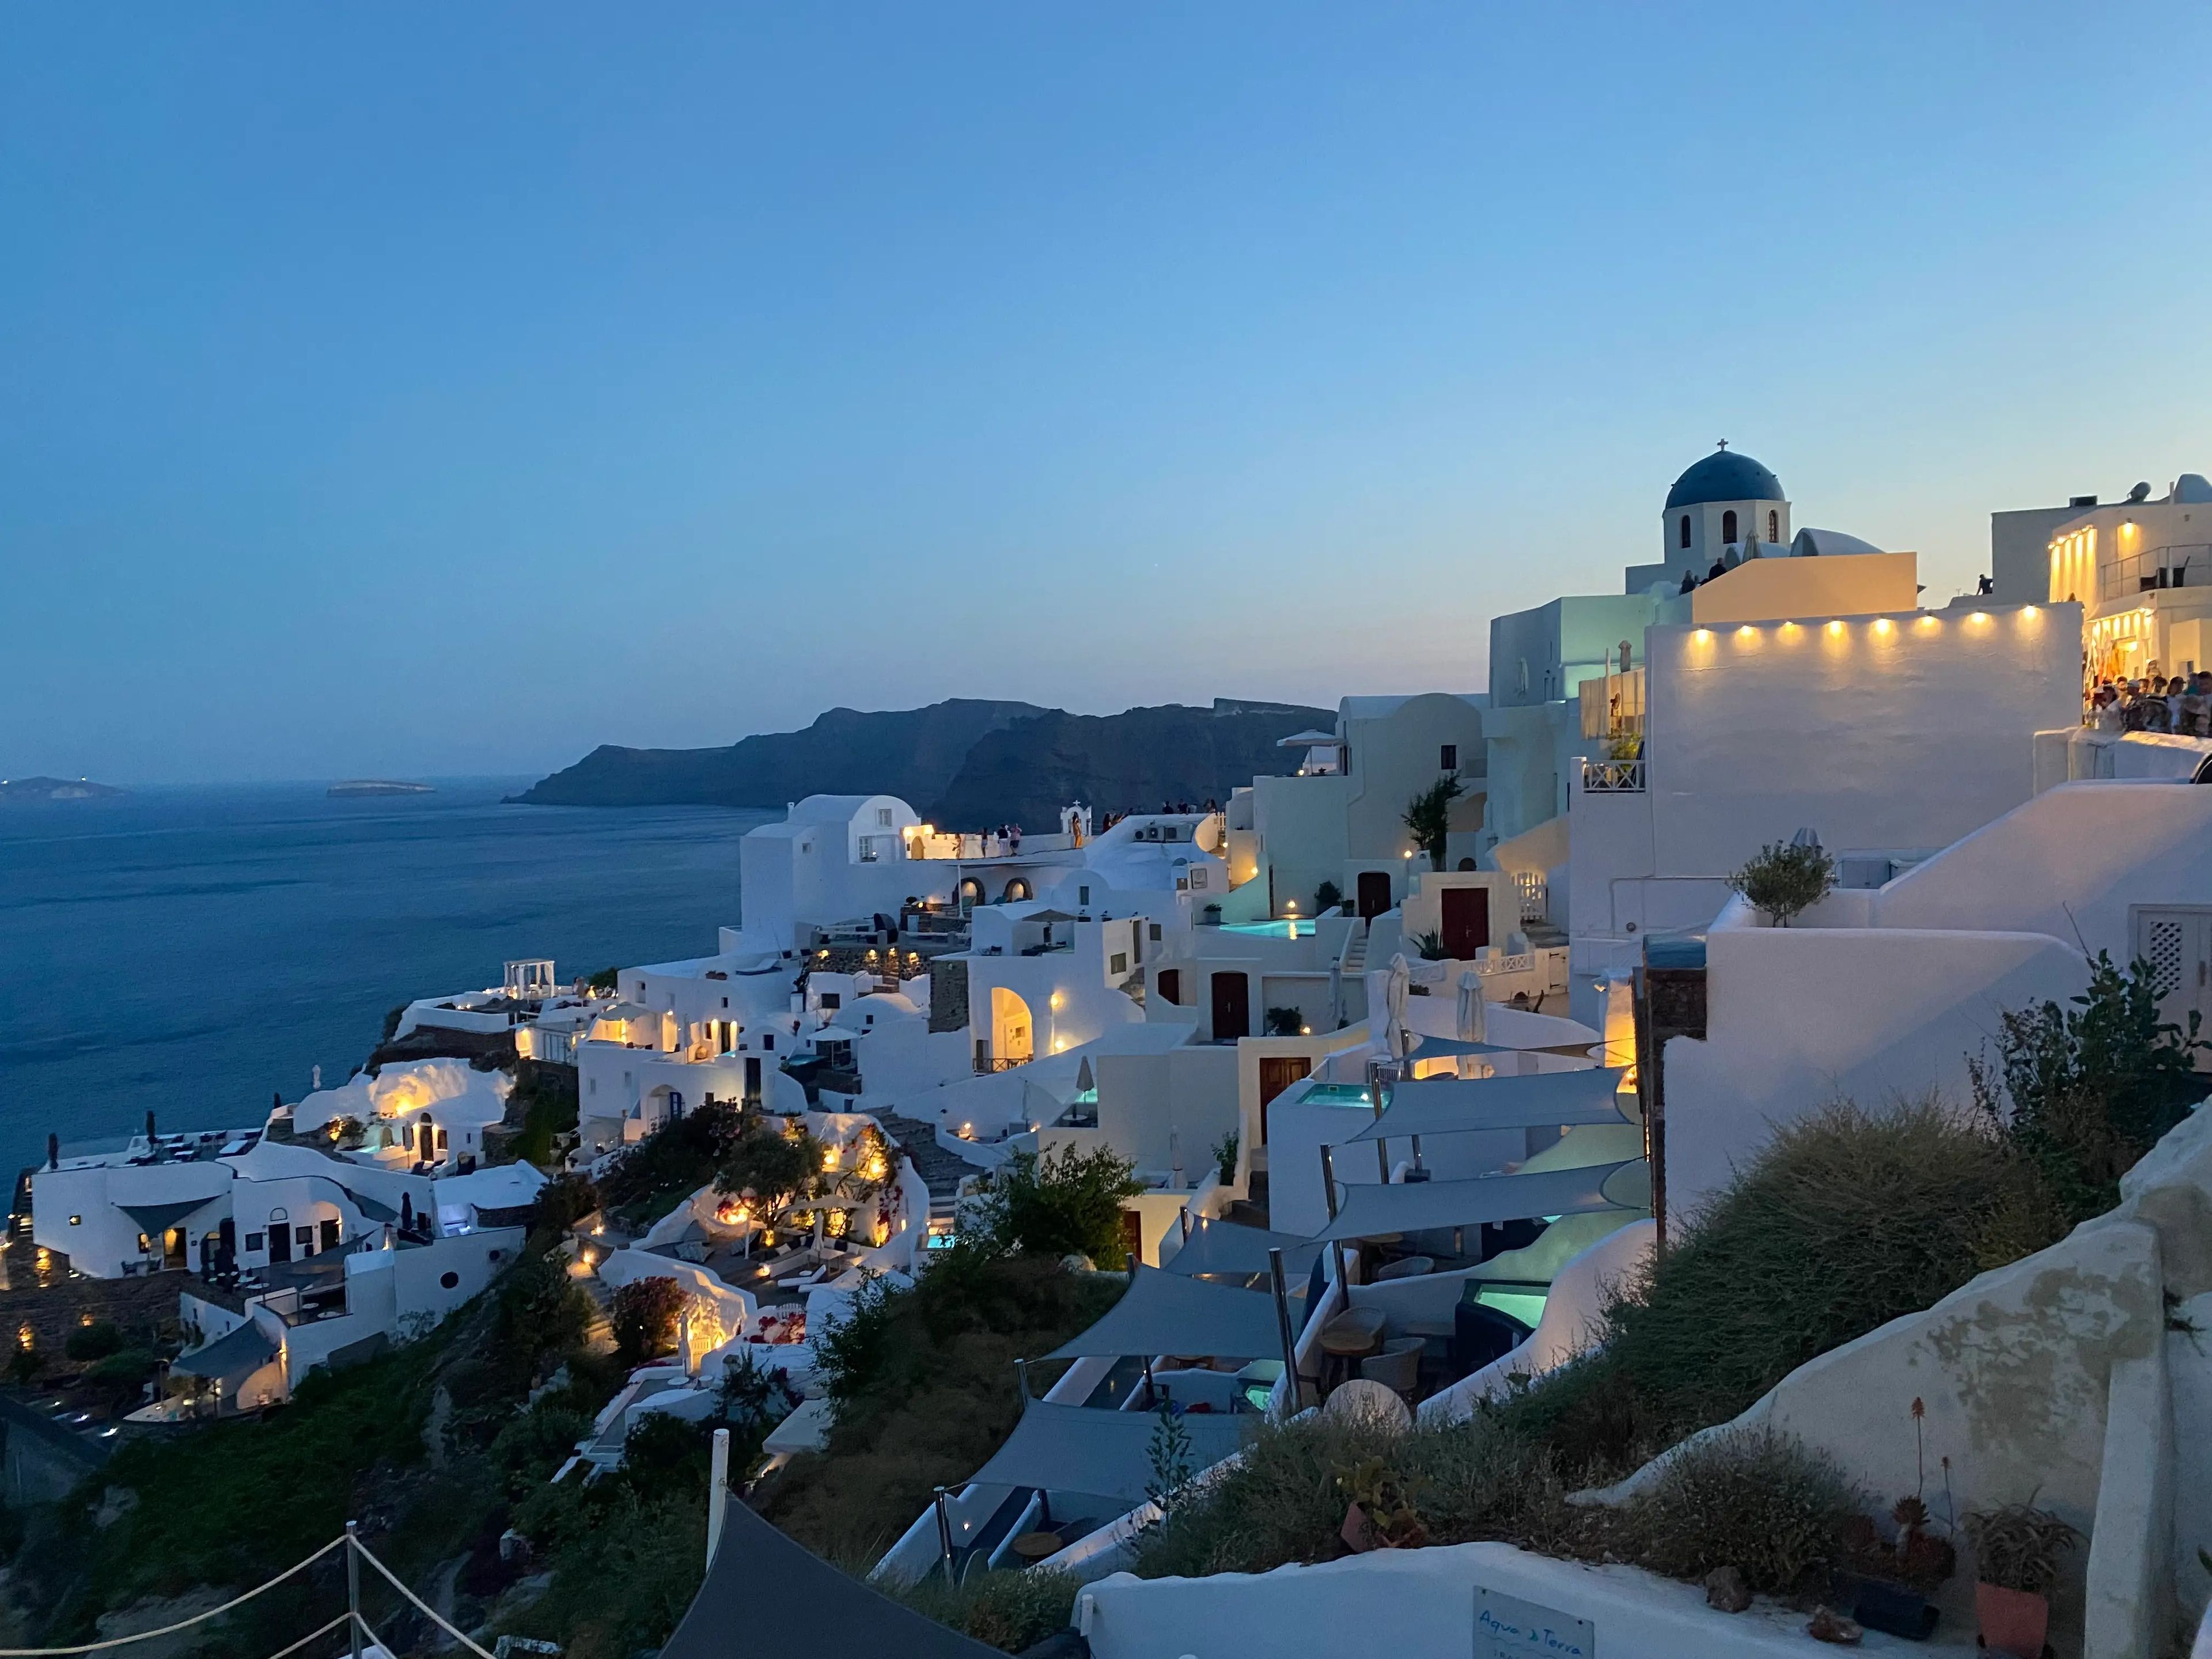 view of santorini in greece lit up at night